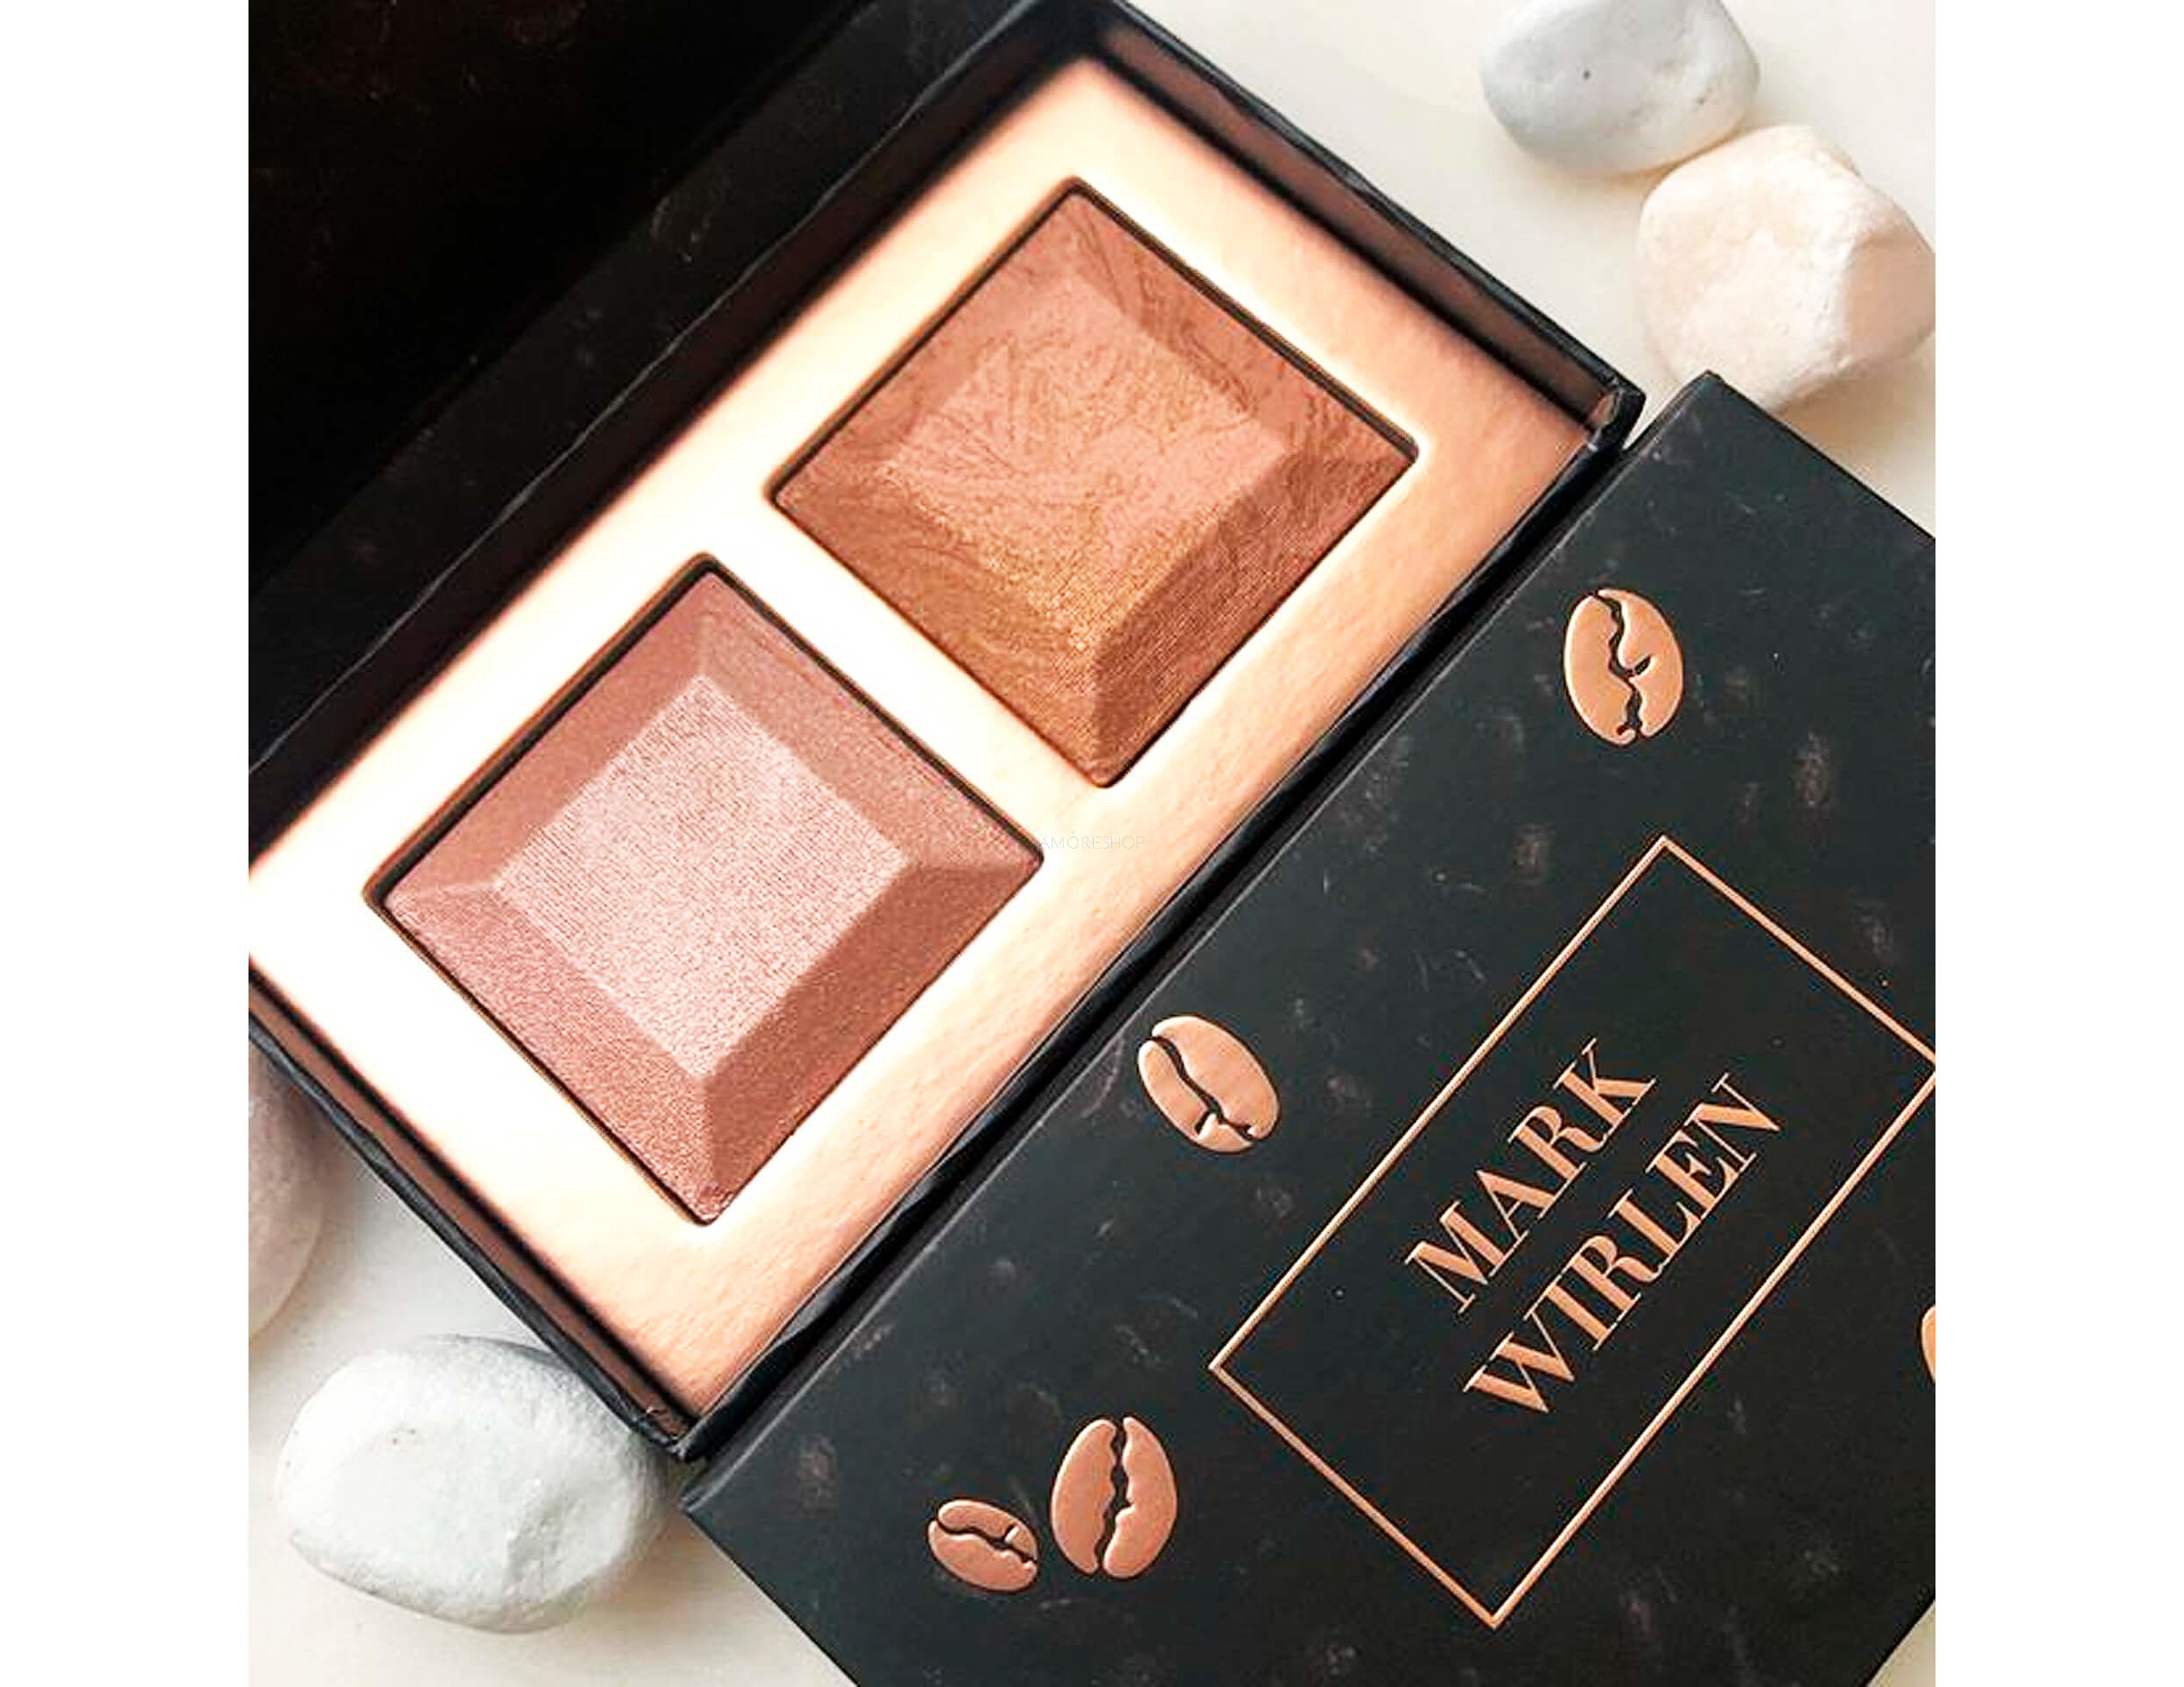 What is the difference between highlighter and eyeshadow?